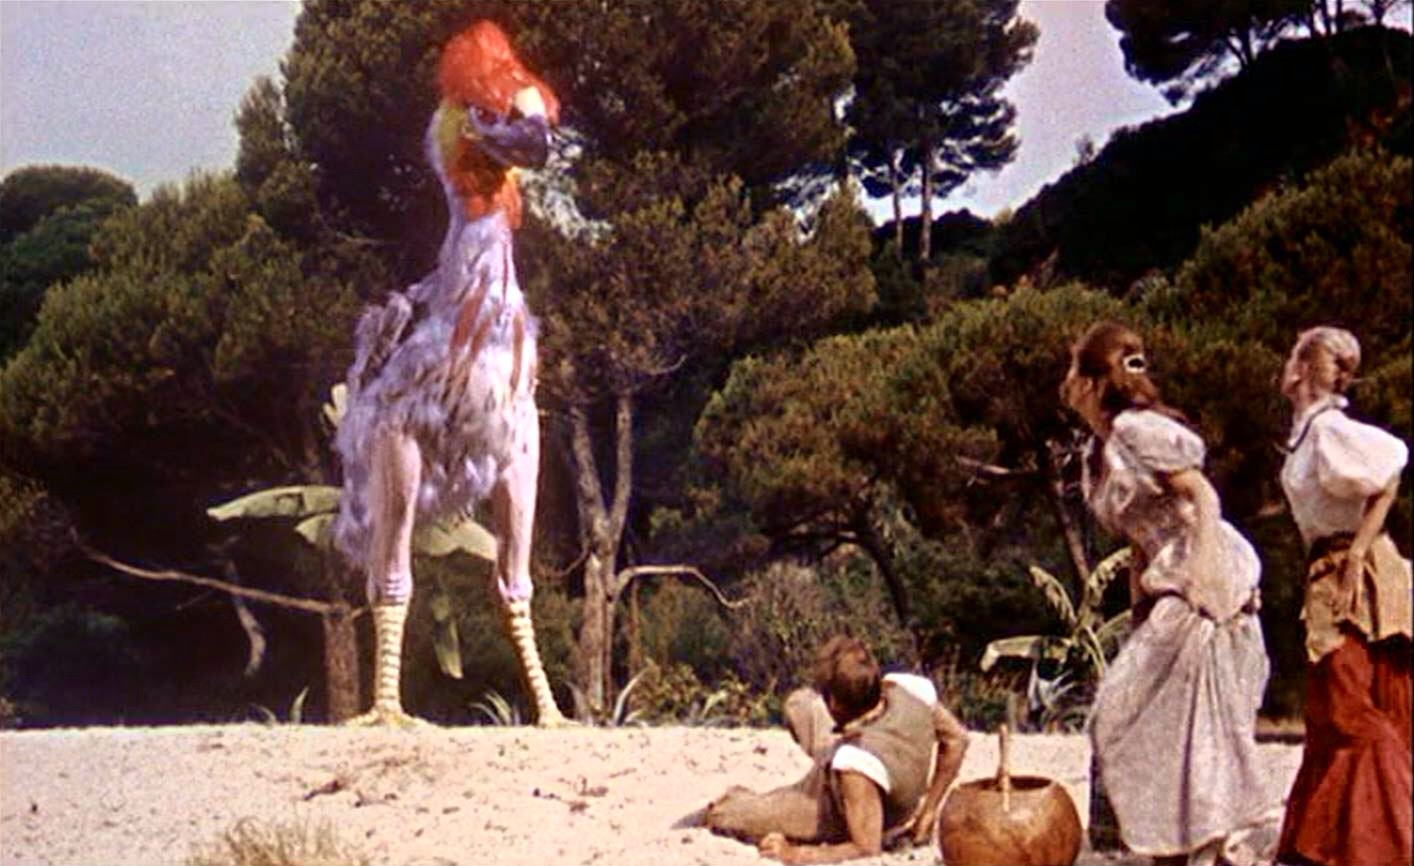 The desert island castaways encounter a giant chicken (a prehistoric Phoracos according to Ray Harryhausen) in Mysterious Island (1961)